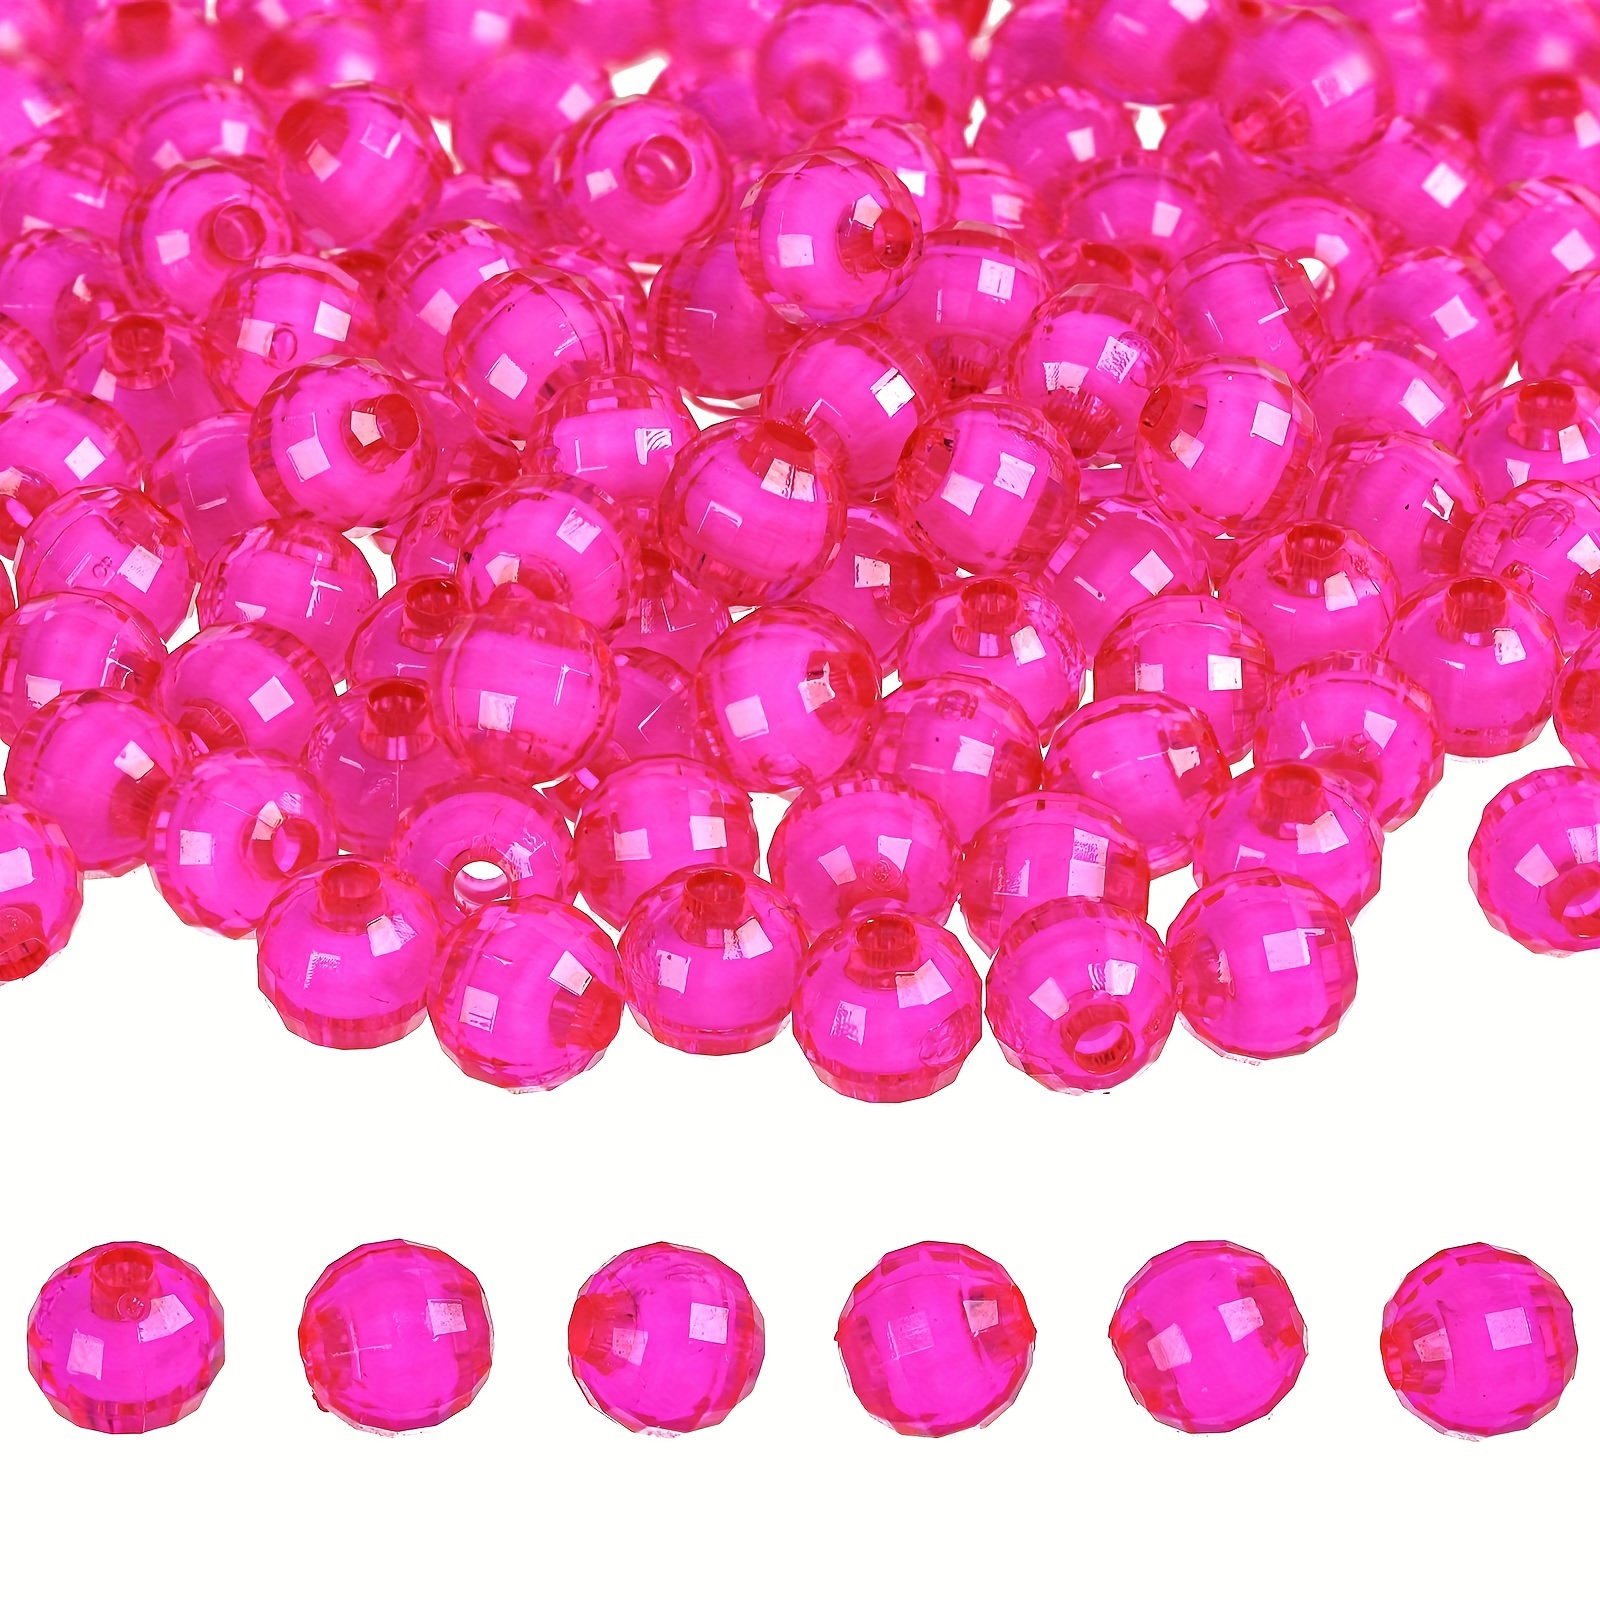 Red Glass Beads, 10mm Smooth Round - Golden Age Beads